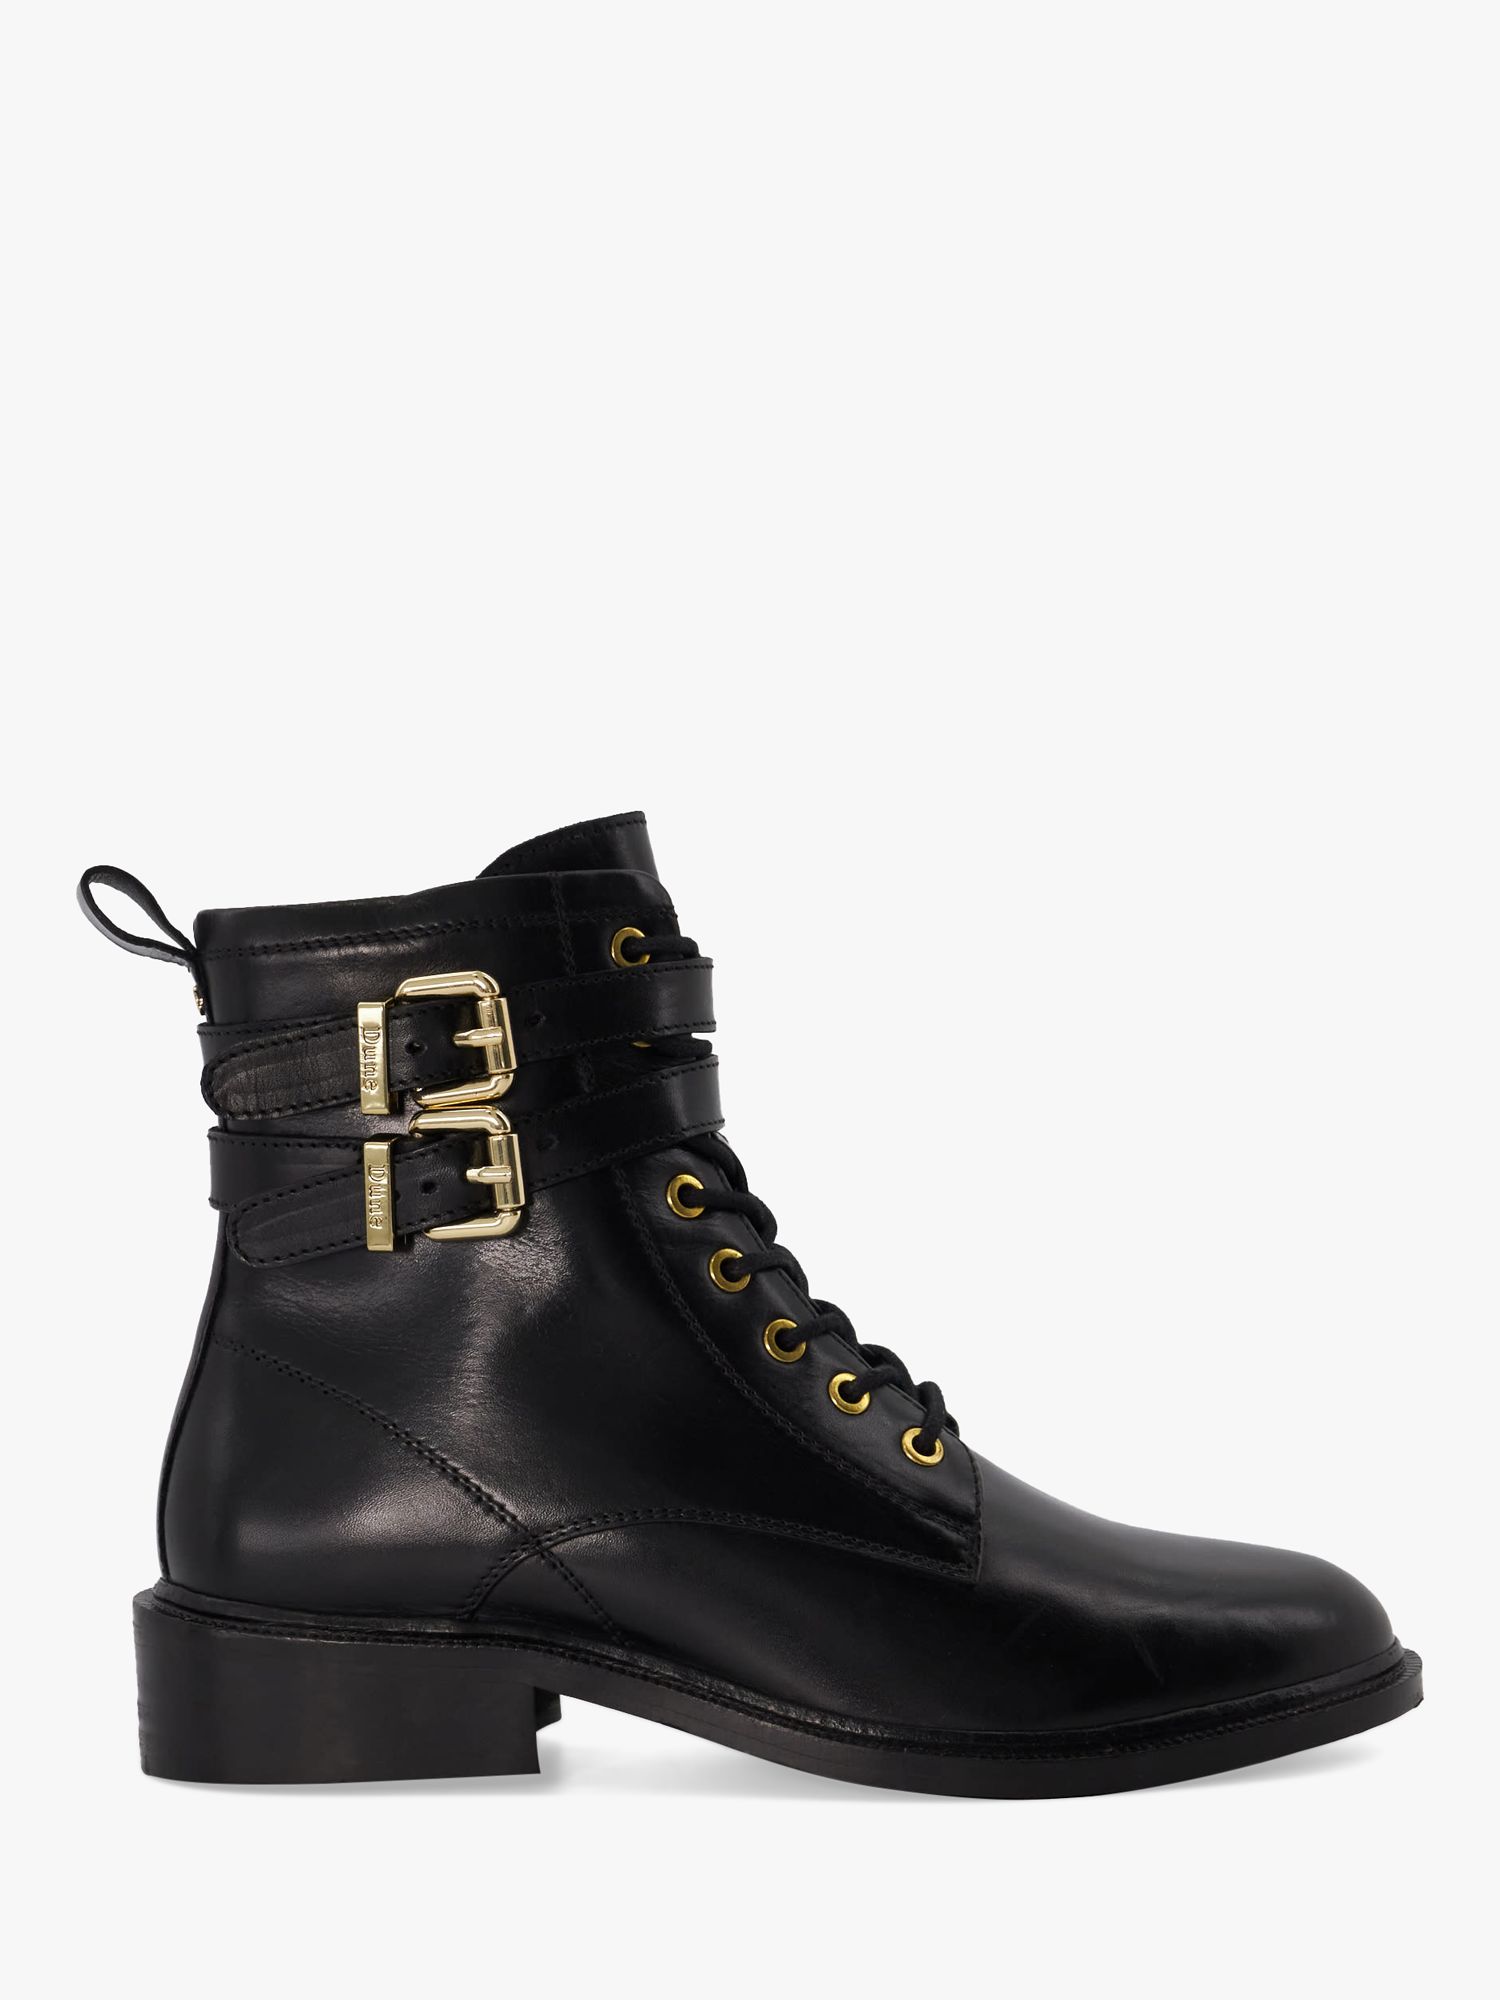 Dune Phyllis Leather Double Buckle Lace Up Boots, Black at John Lewis ...